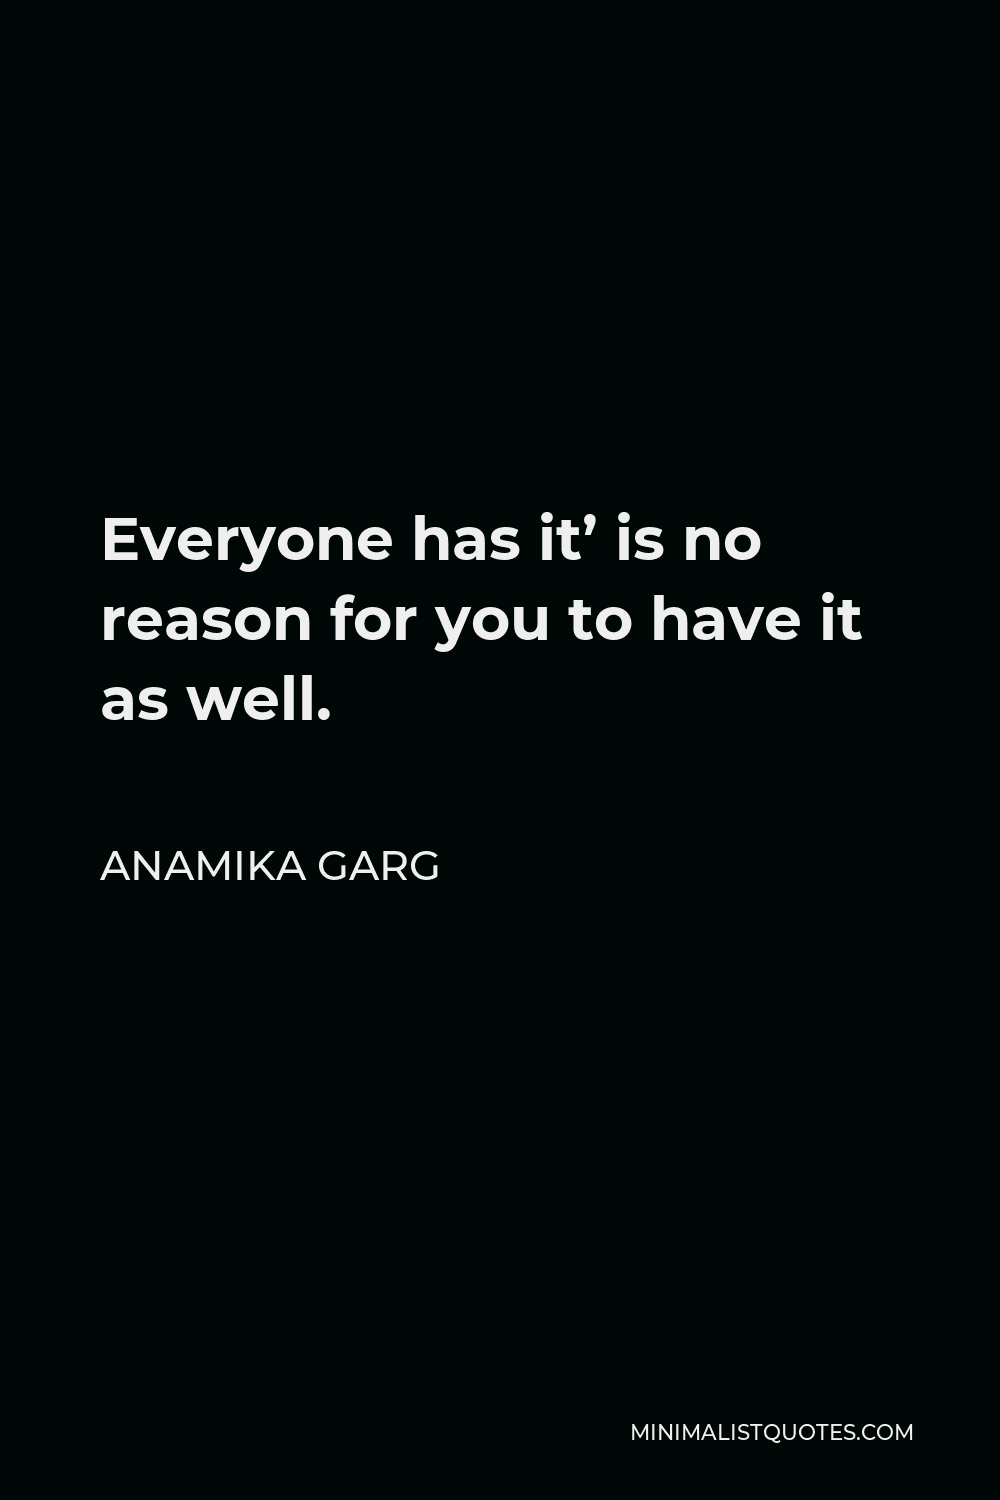 Anamika Garg Quote - Everyone has it’ is no reason for you to have it as well.